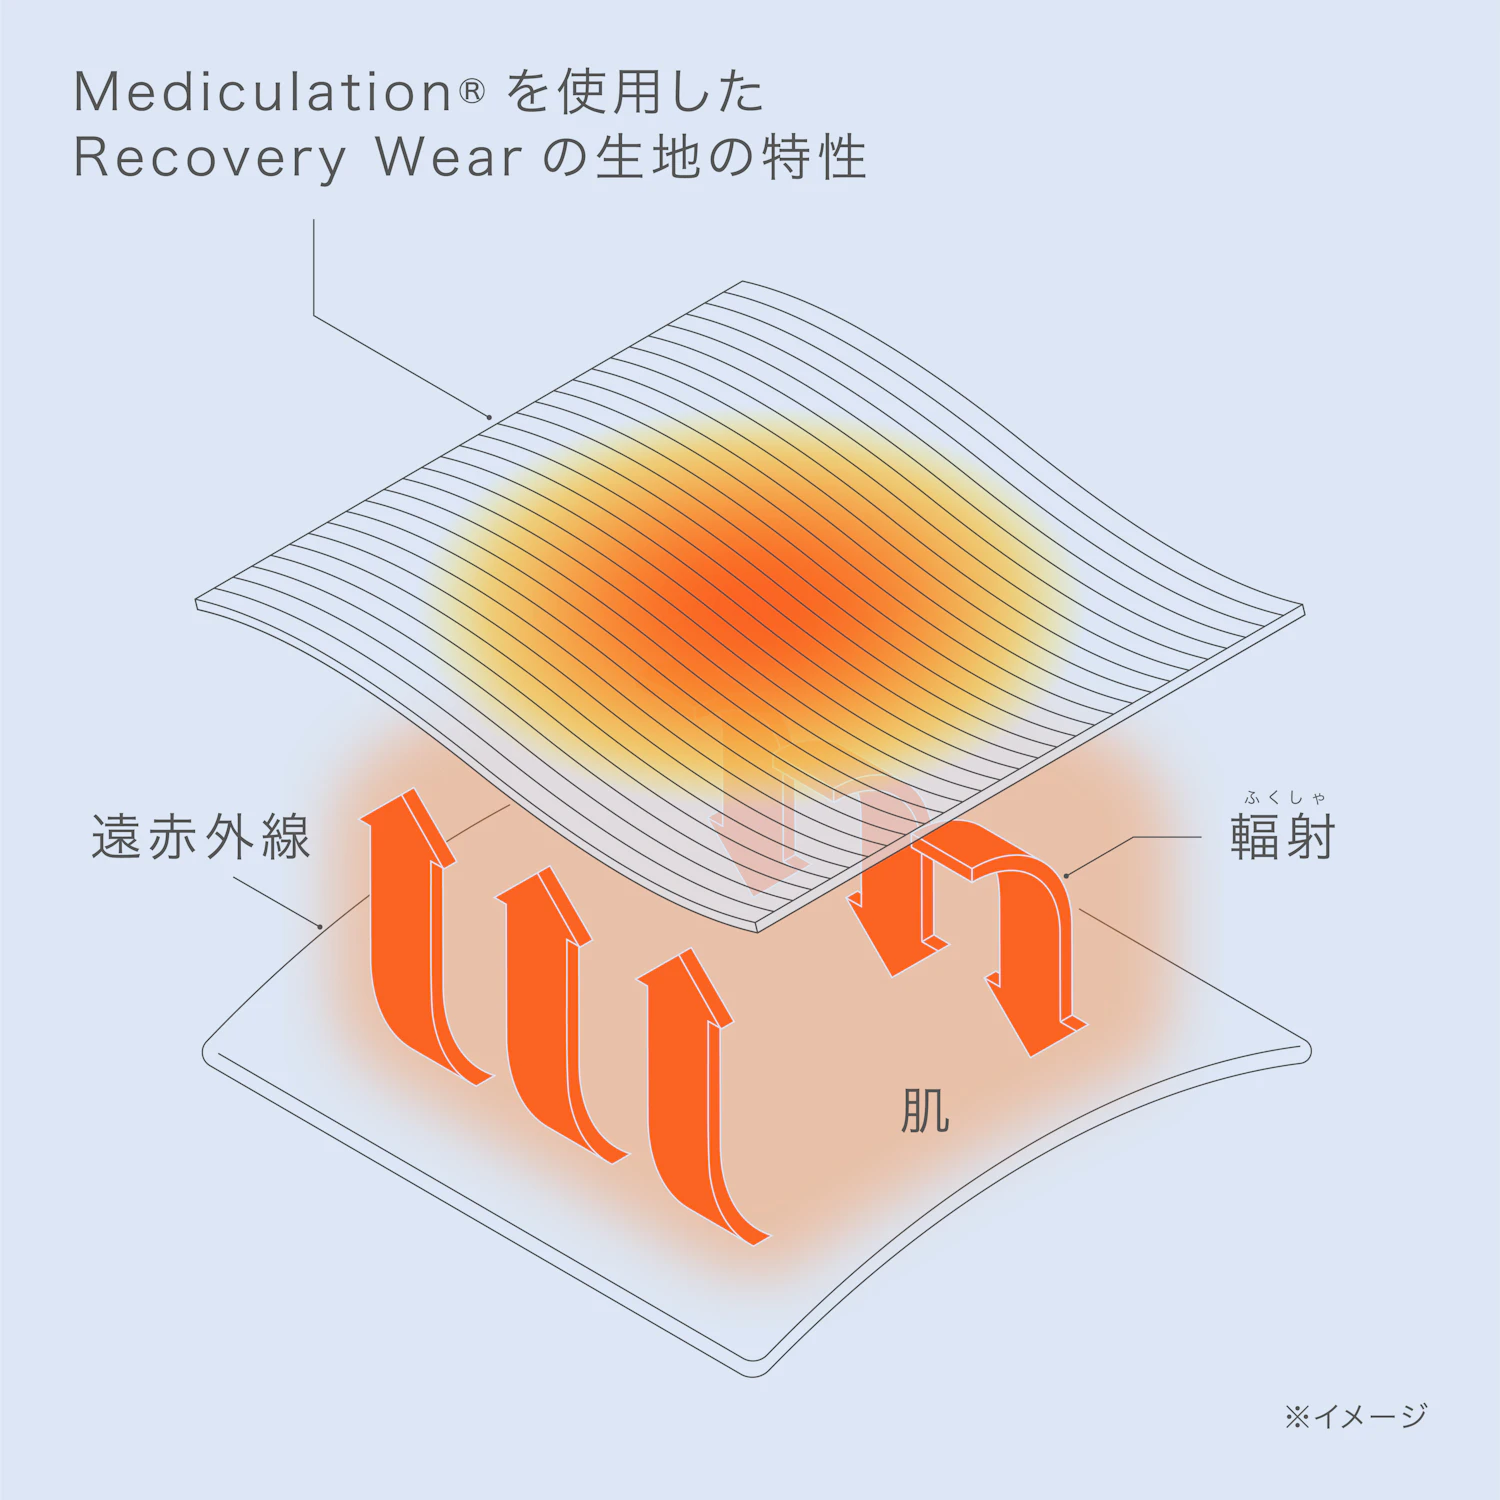 Mediculation radiates far-infrared rays emitted from the body, promoting blood circulation